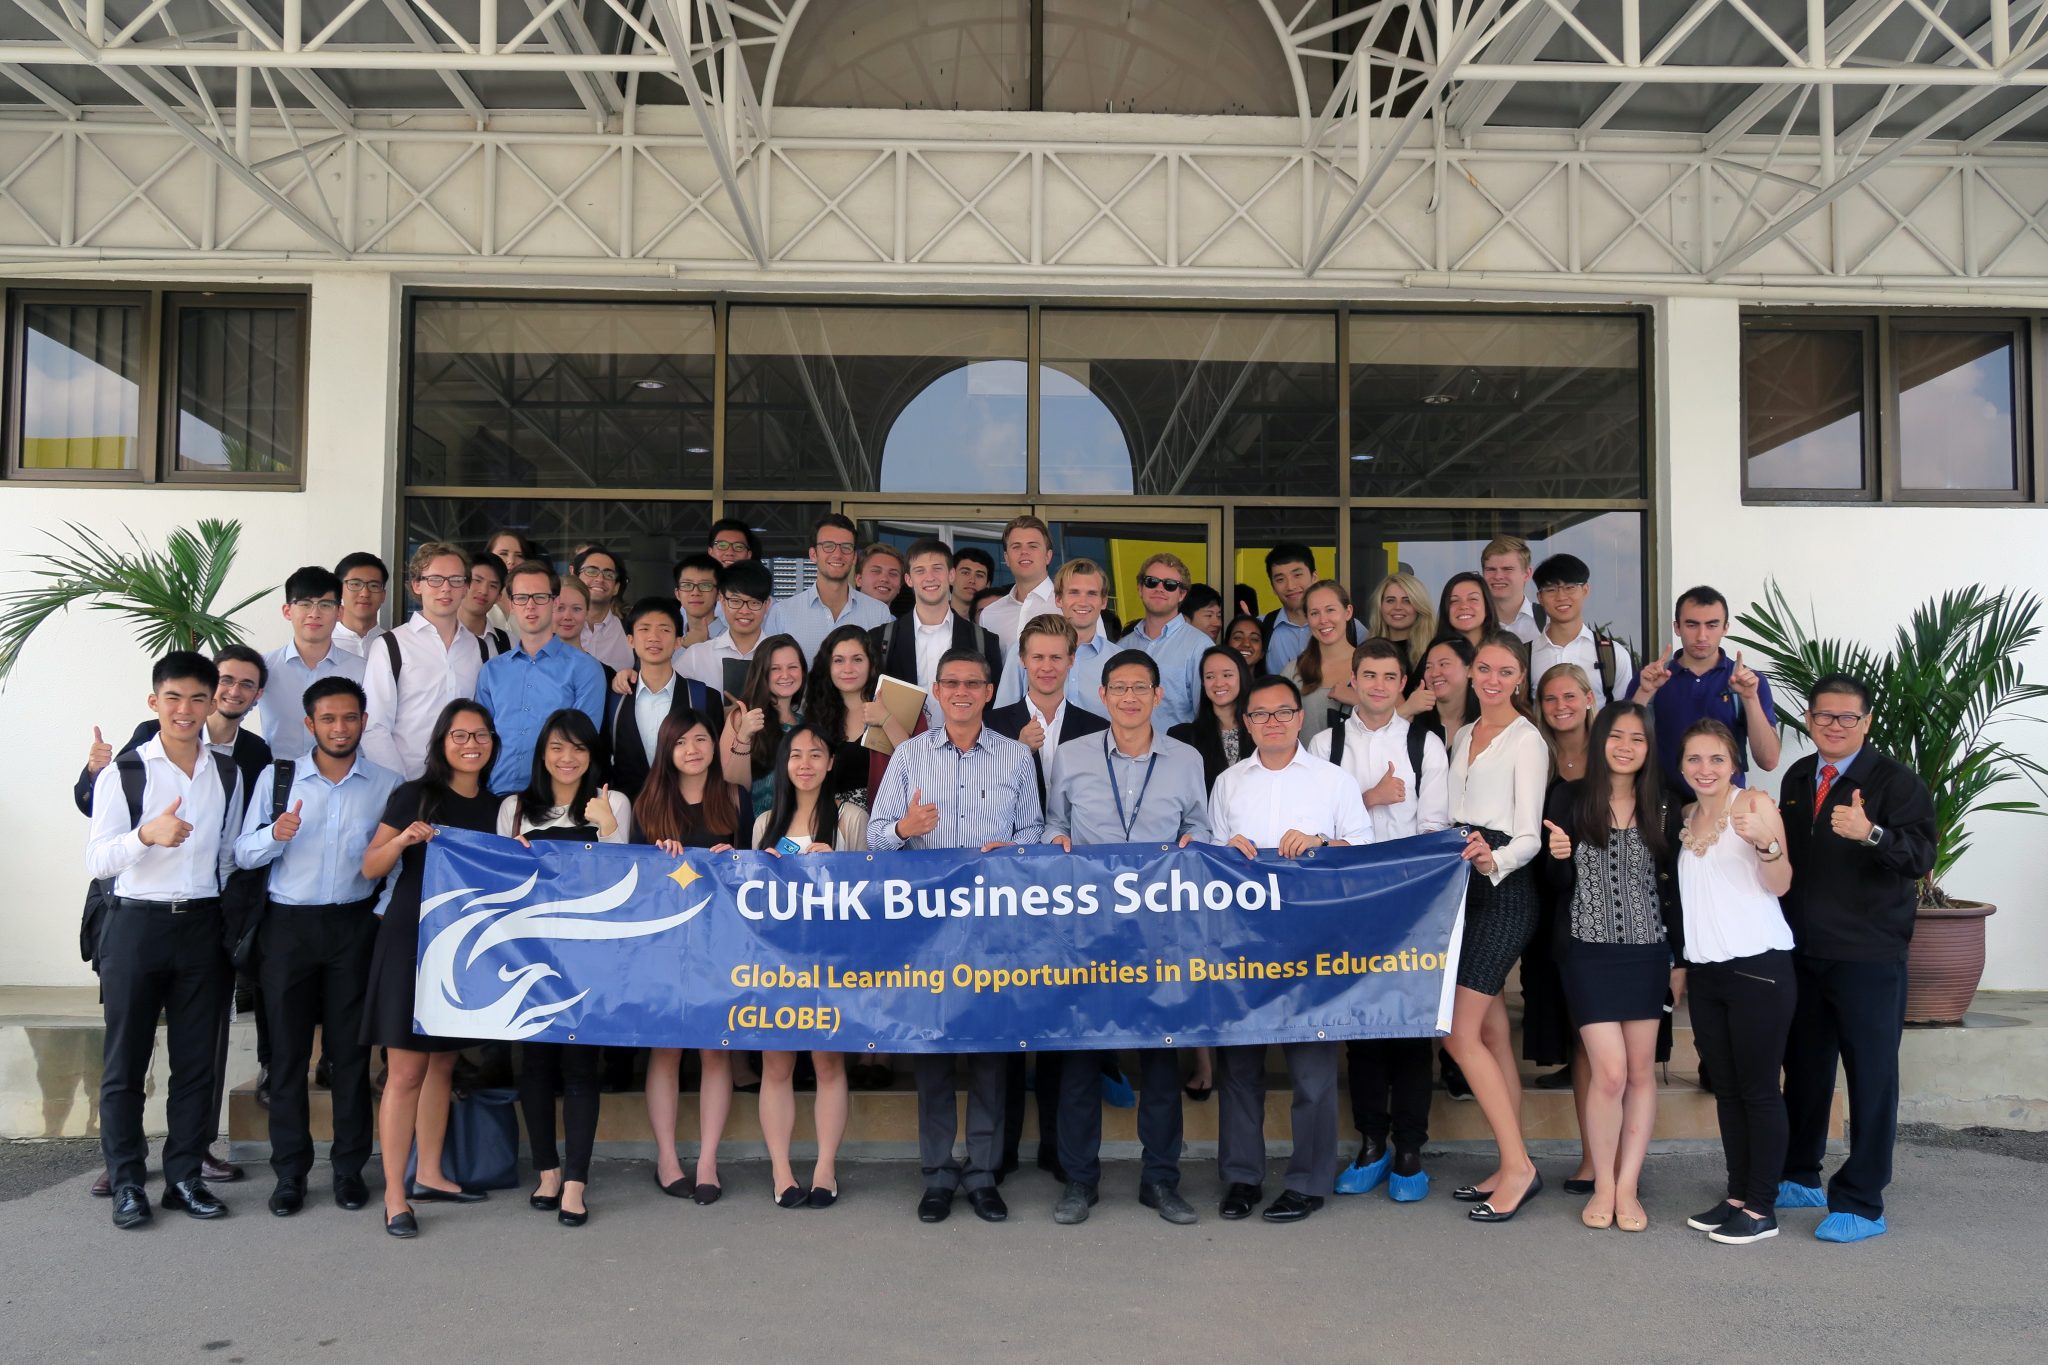 The students posed for a group photo during a company visit.